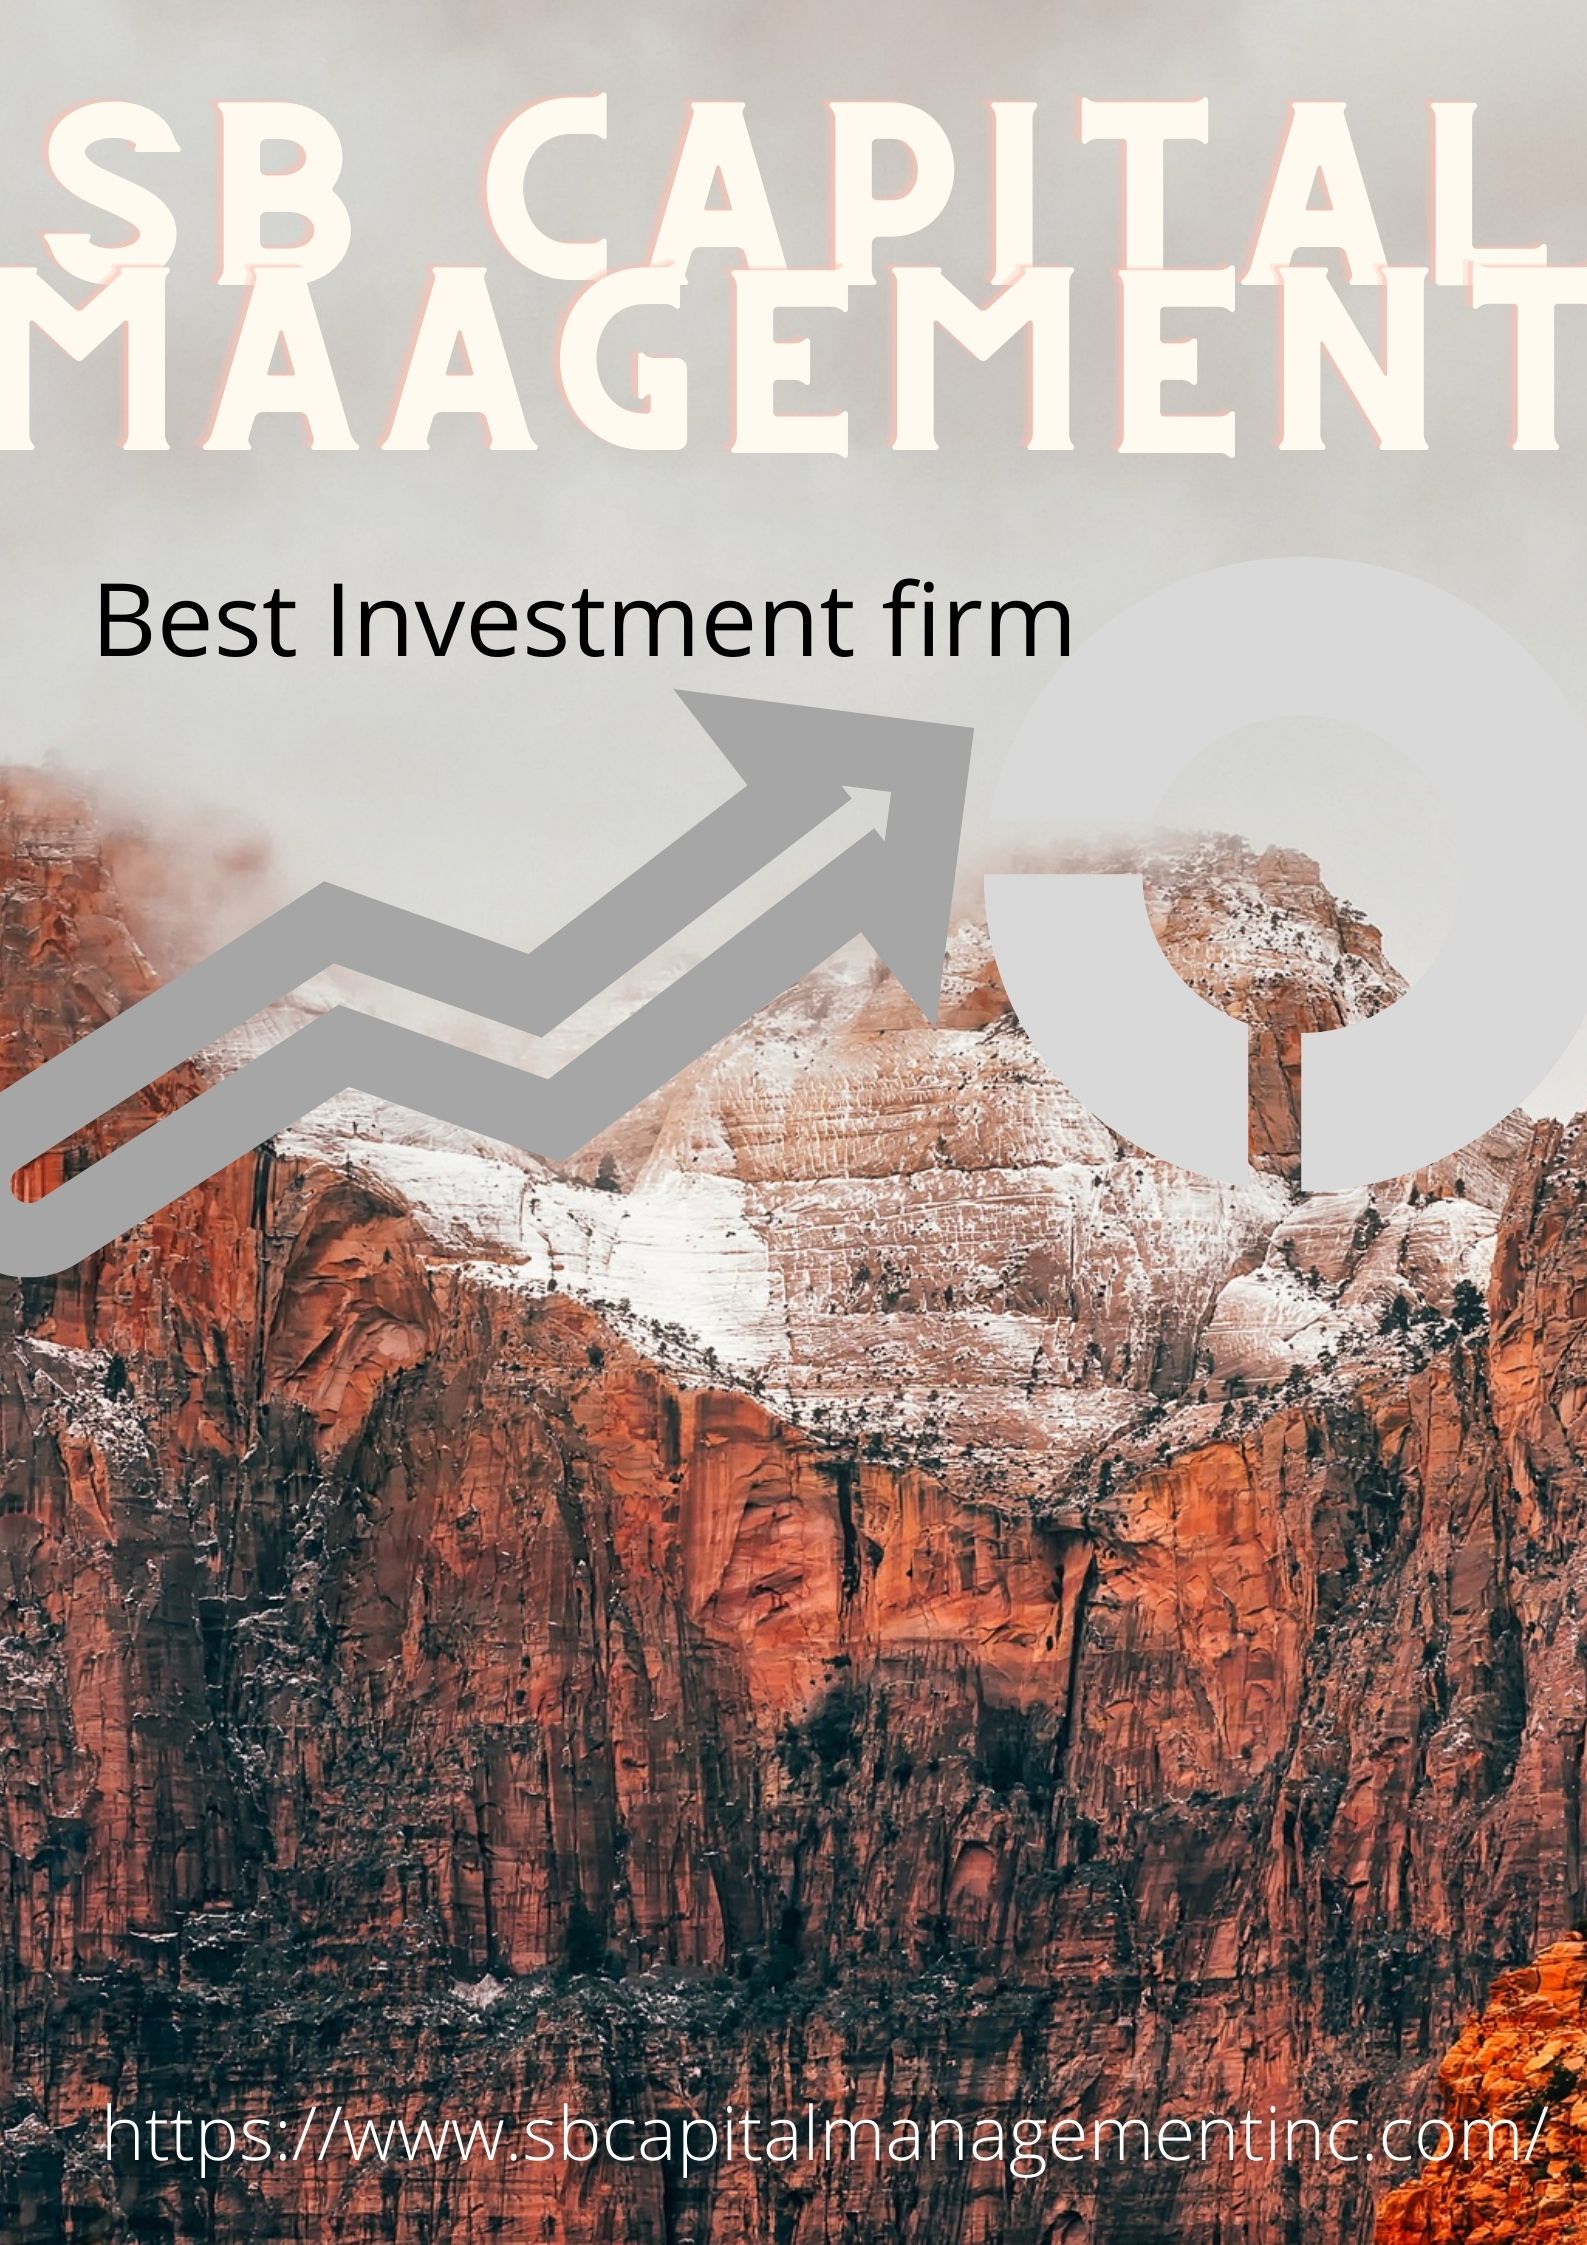 Top 7 Characteristic of Best Investment Firms